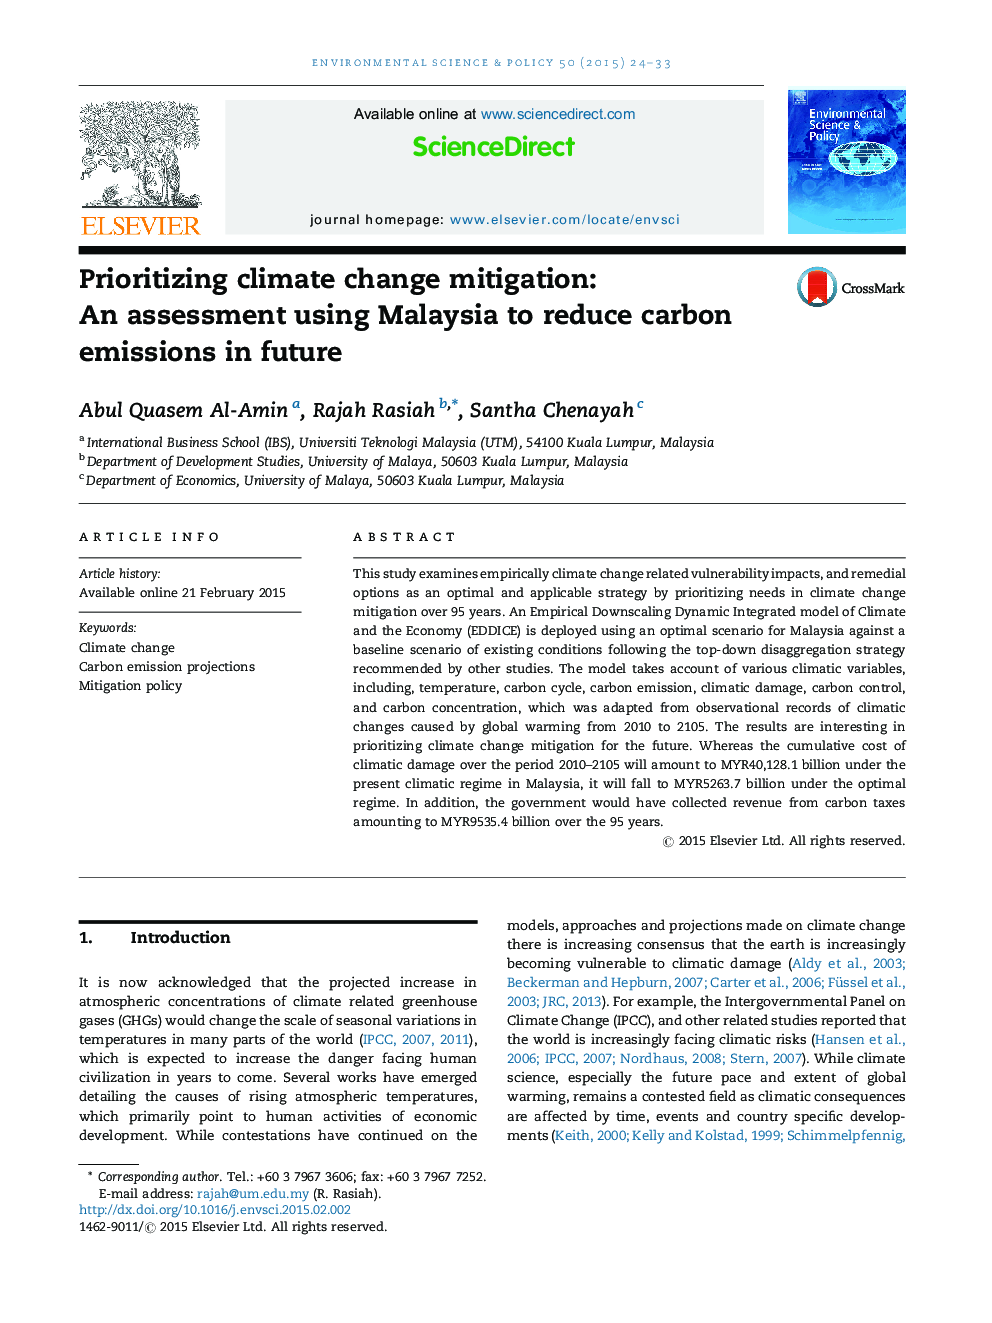 Prioritizing climate change mitigation: An assessment using Malaysia to reduce carbon emissions in future